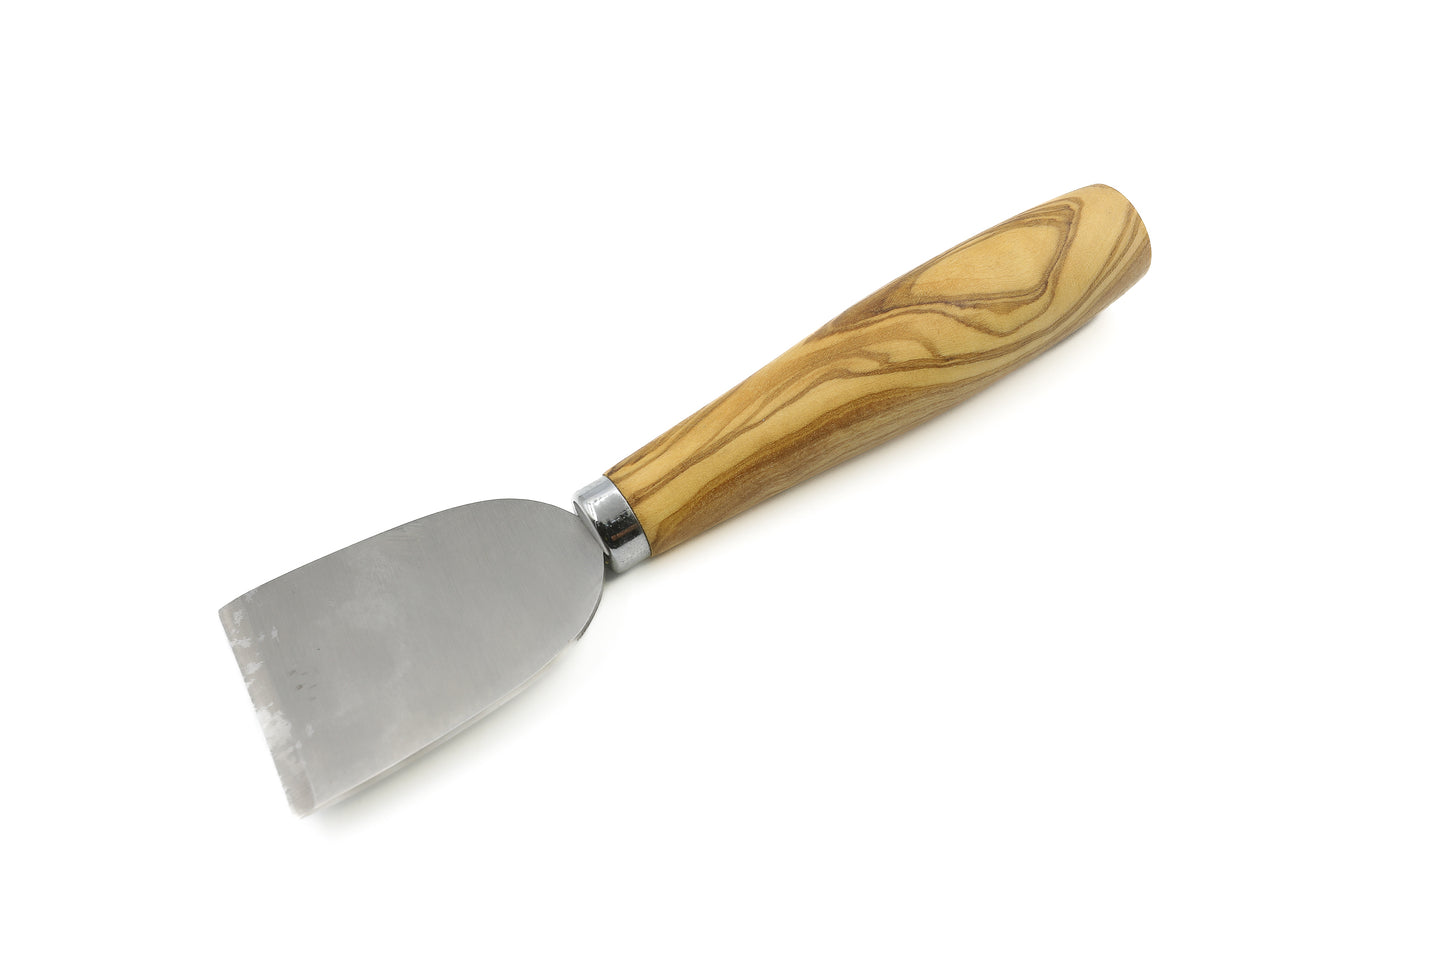 Sculpted Beauty: Olive Wood Cheese Knife Ensemble